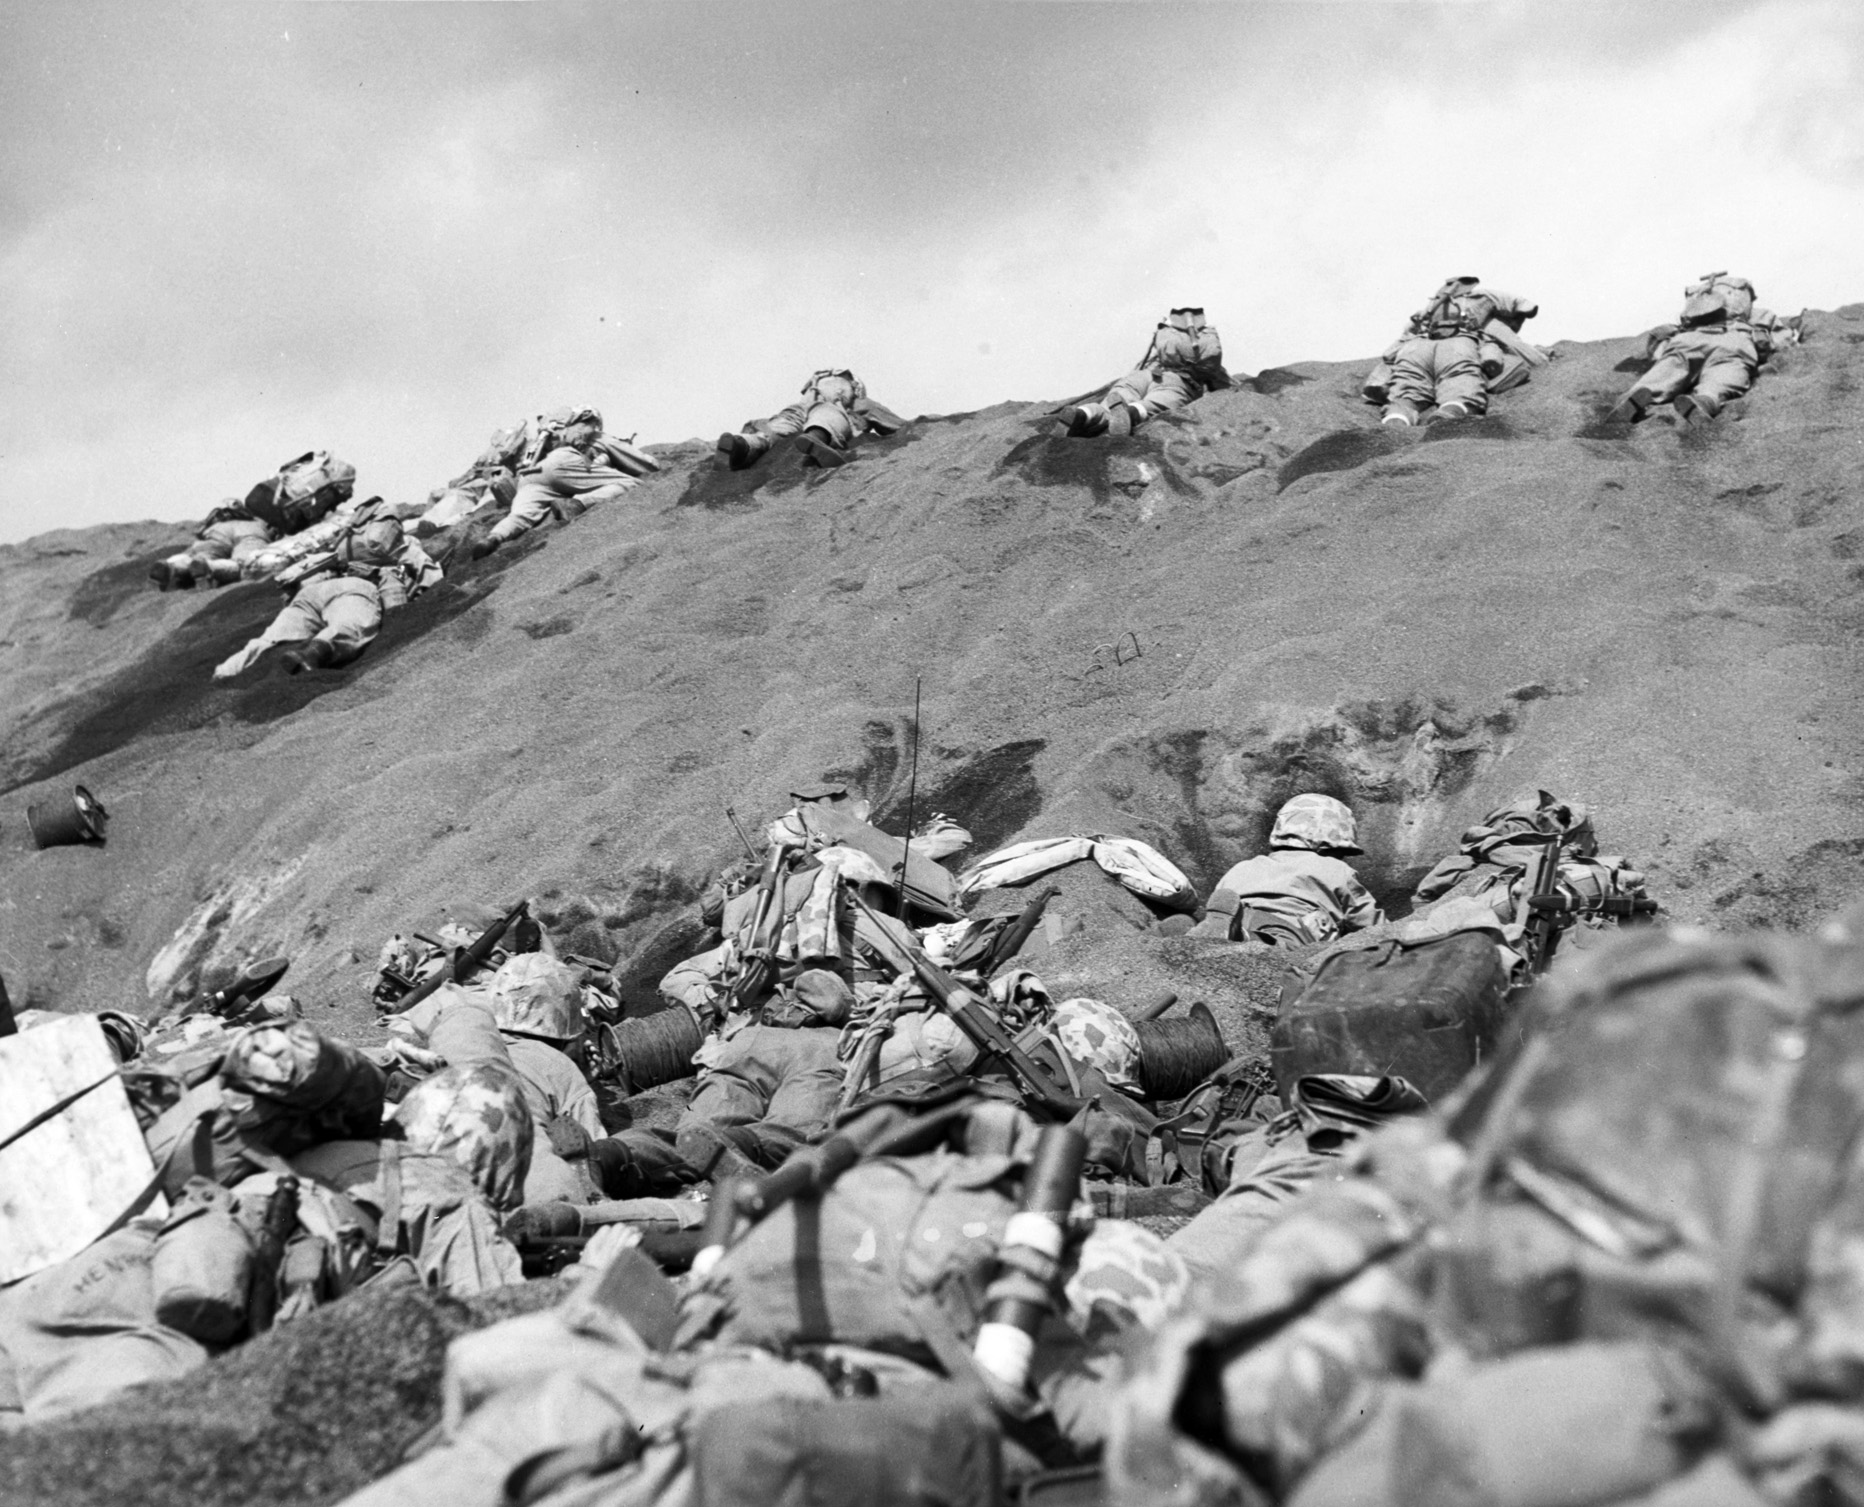 During the initial landings on Iwo Jima on February 19, 1945, U.S. Marines of the Fifth Division take heavy Japanese fire as they struggle up a slope off Red Beach 1. The black volcanic sand of Iwo Jima was difficult for Marines to traverse, and tracked and wheeled vehicles often bogged down.